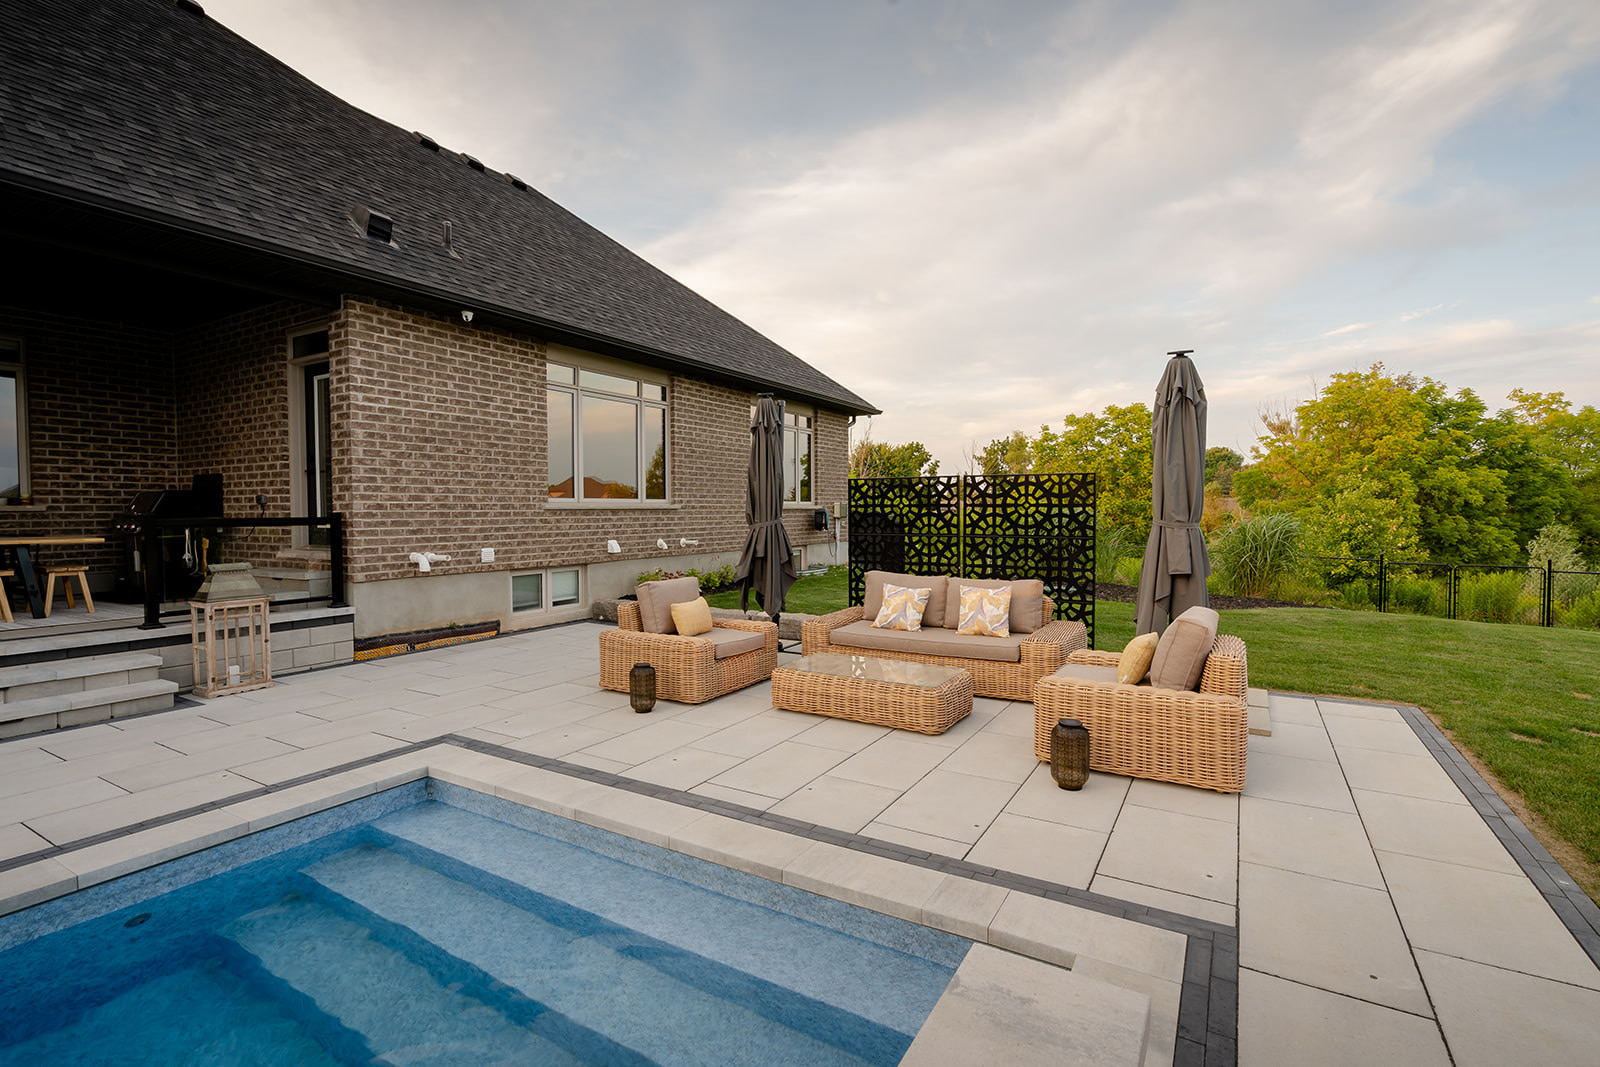 An outdoor seating area with and an inground pool in front.